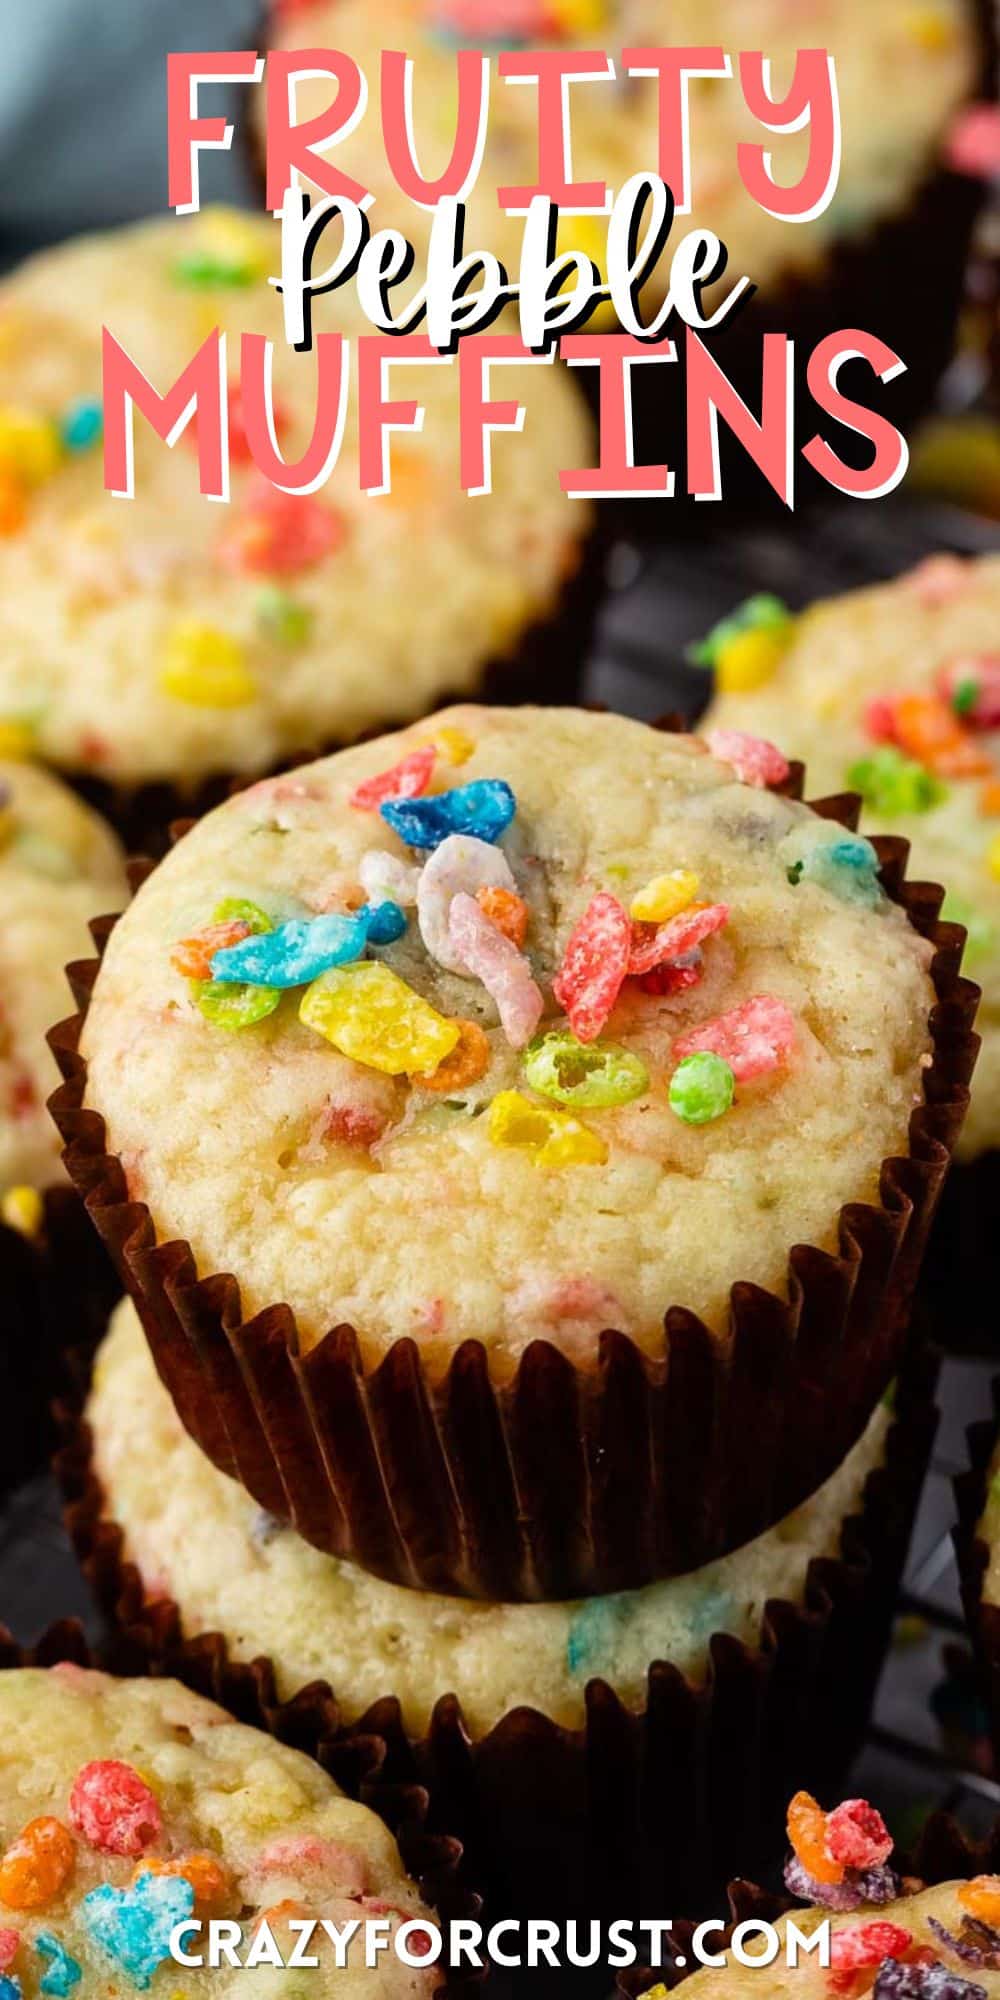 fruity pebbles muffins in a brown cupcake tin topped with fruity pebble cereal with words on the image.